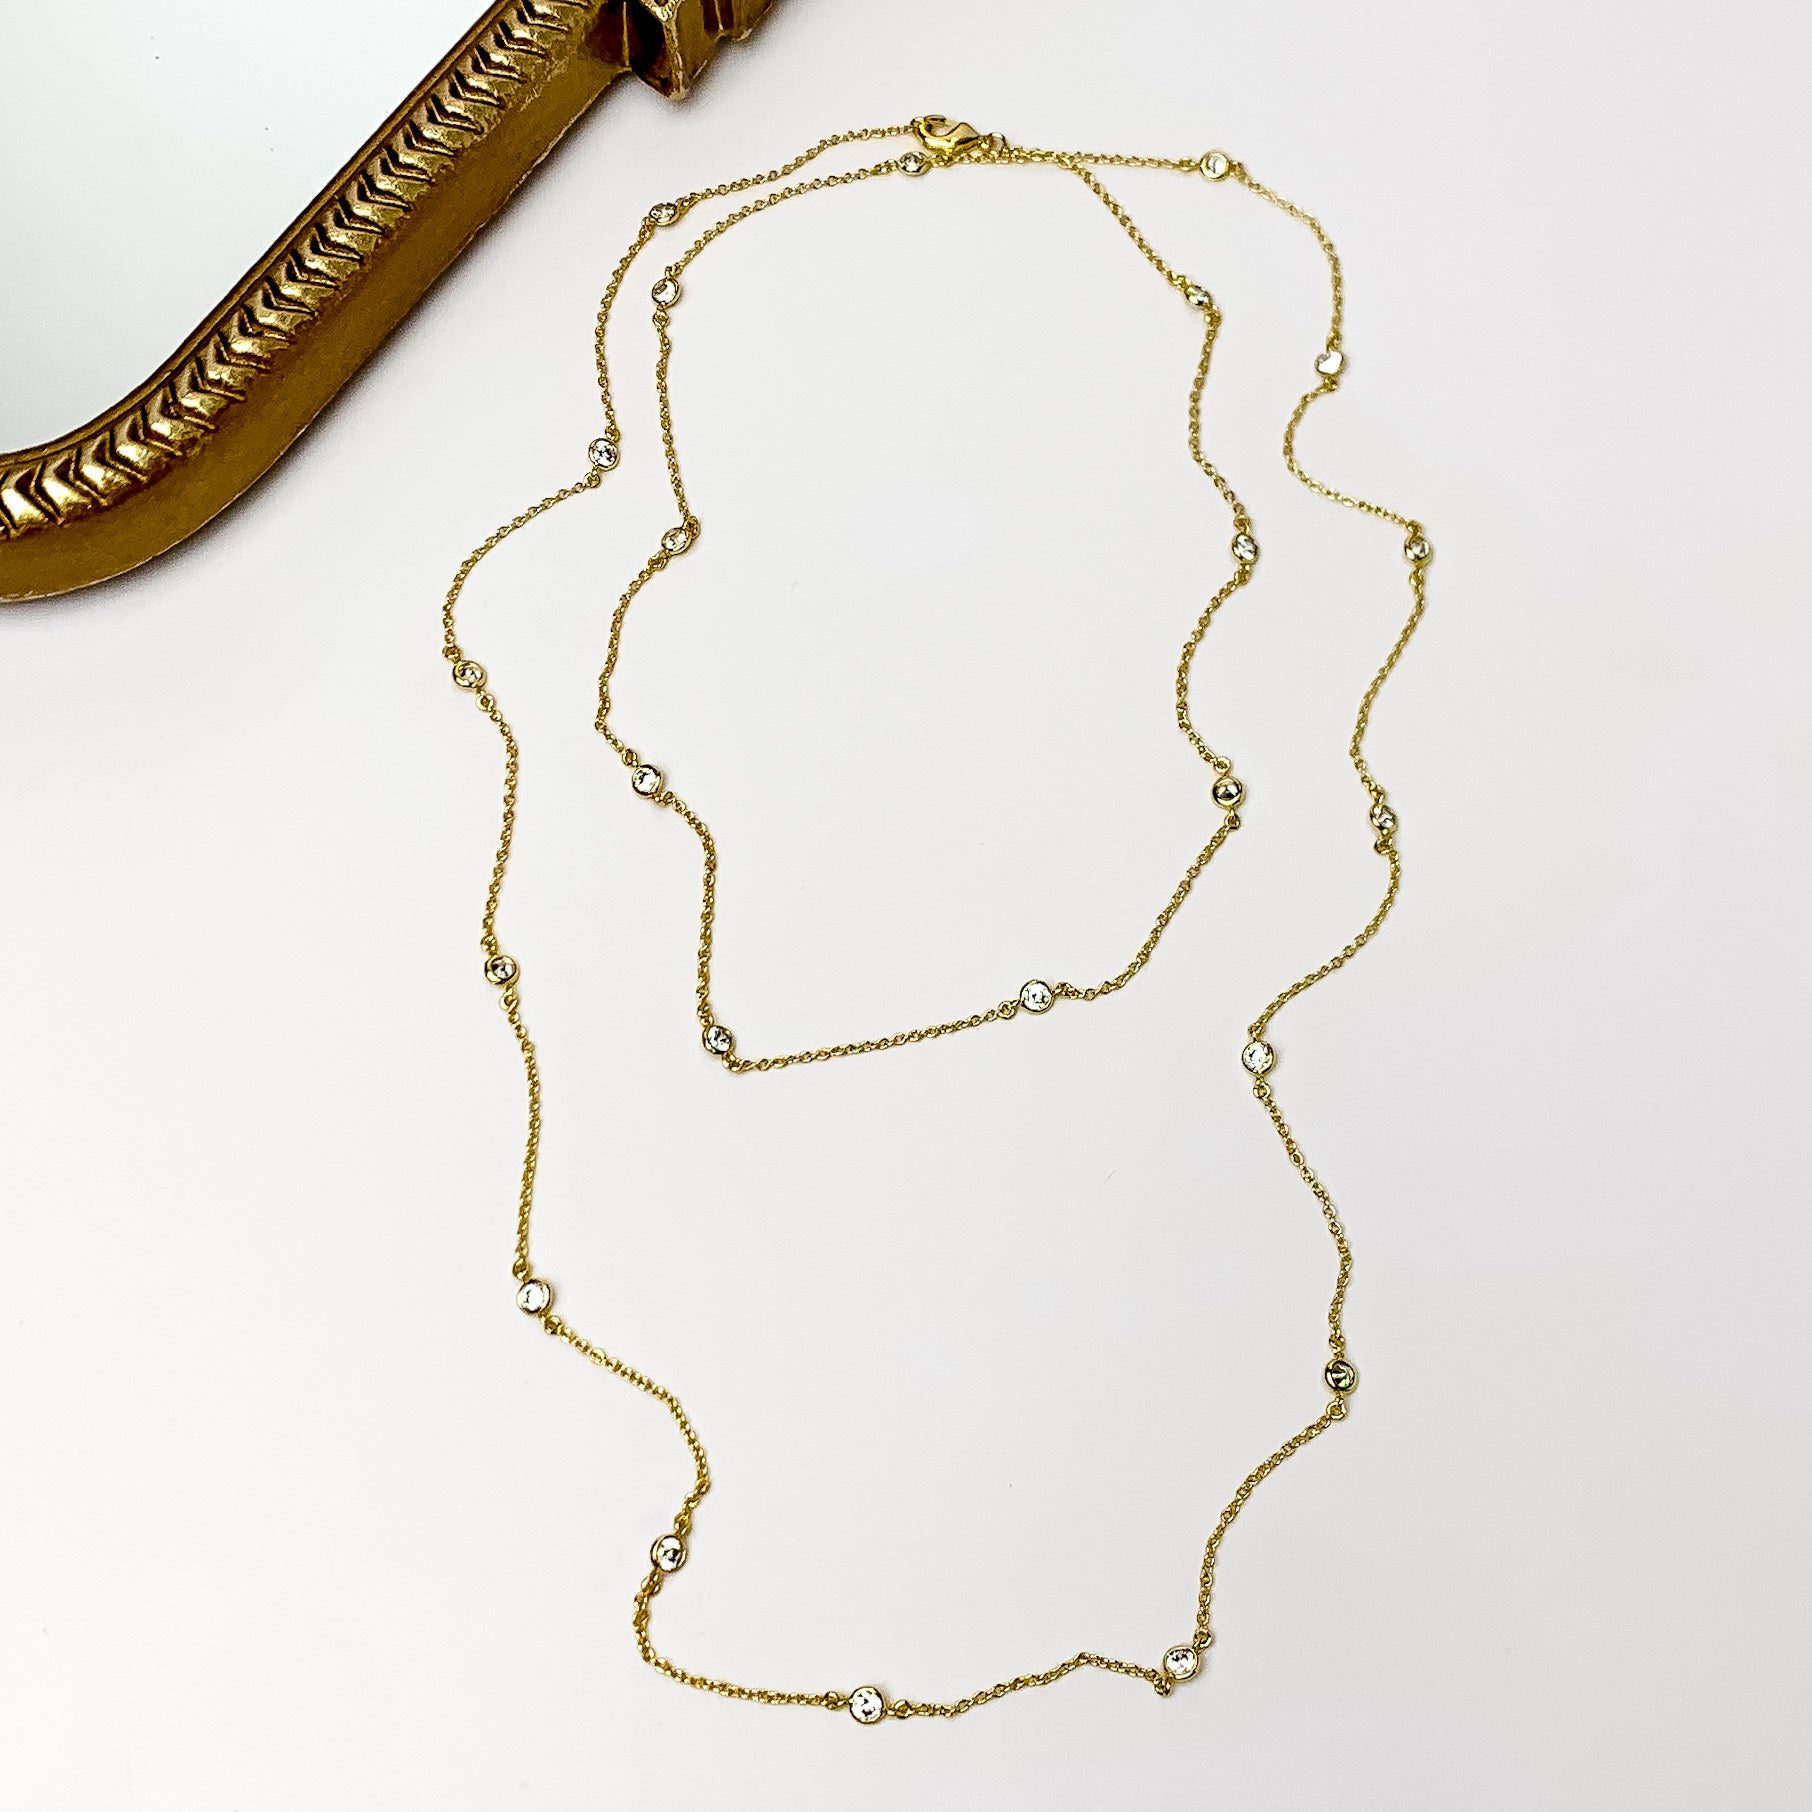 Simple Long Gold Tone Necklace With Clear Crystals. Pictured on a white background with a wood piece behind the necklace.